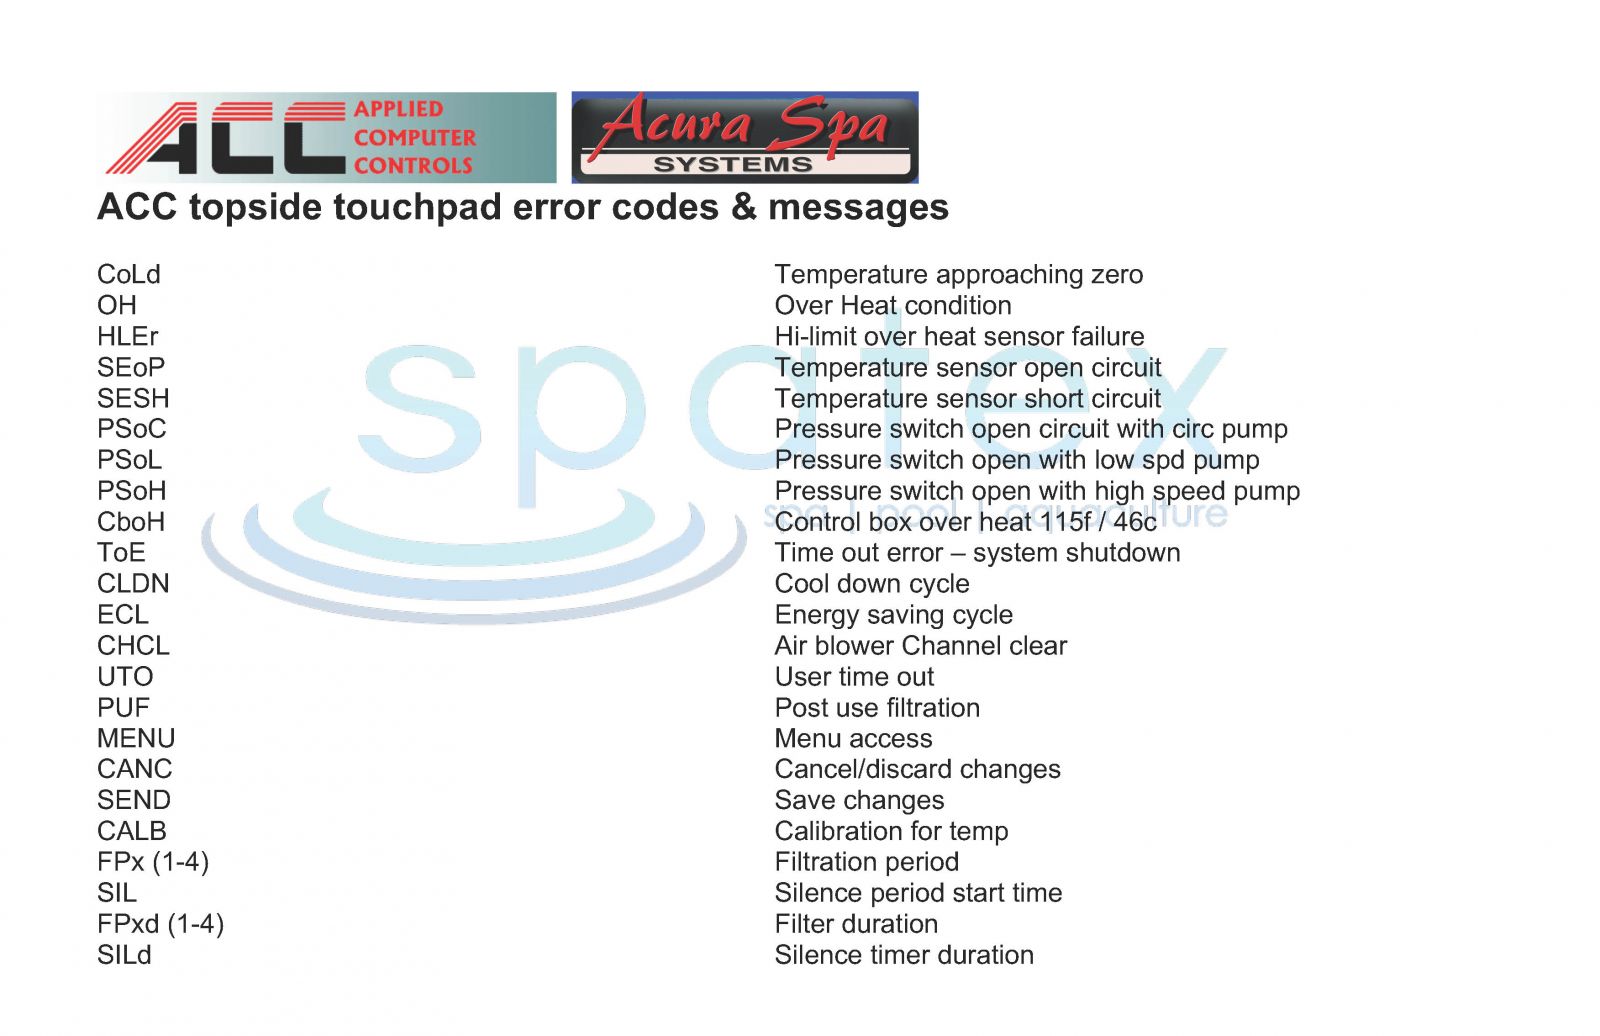 ACC Applied Computer Controls and Acura Spas topside spa error codes, fault codes